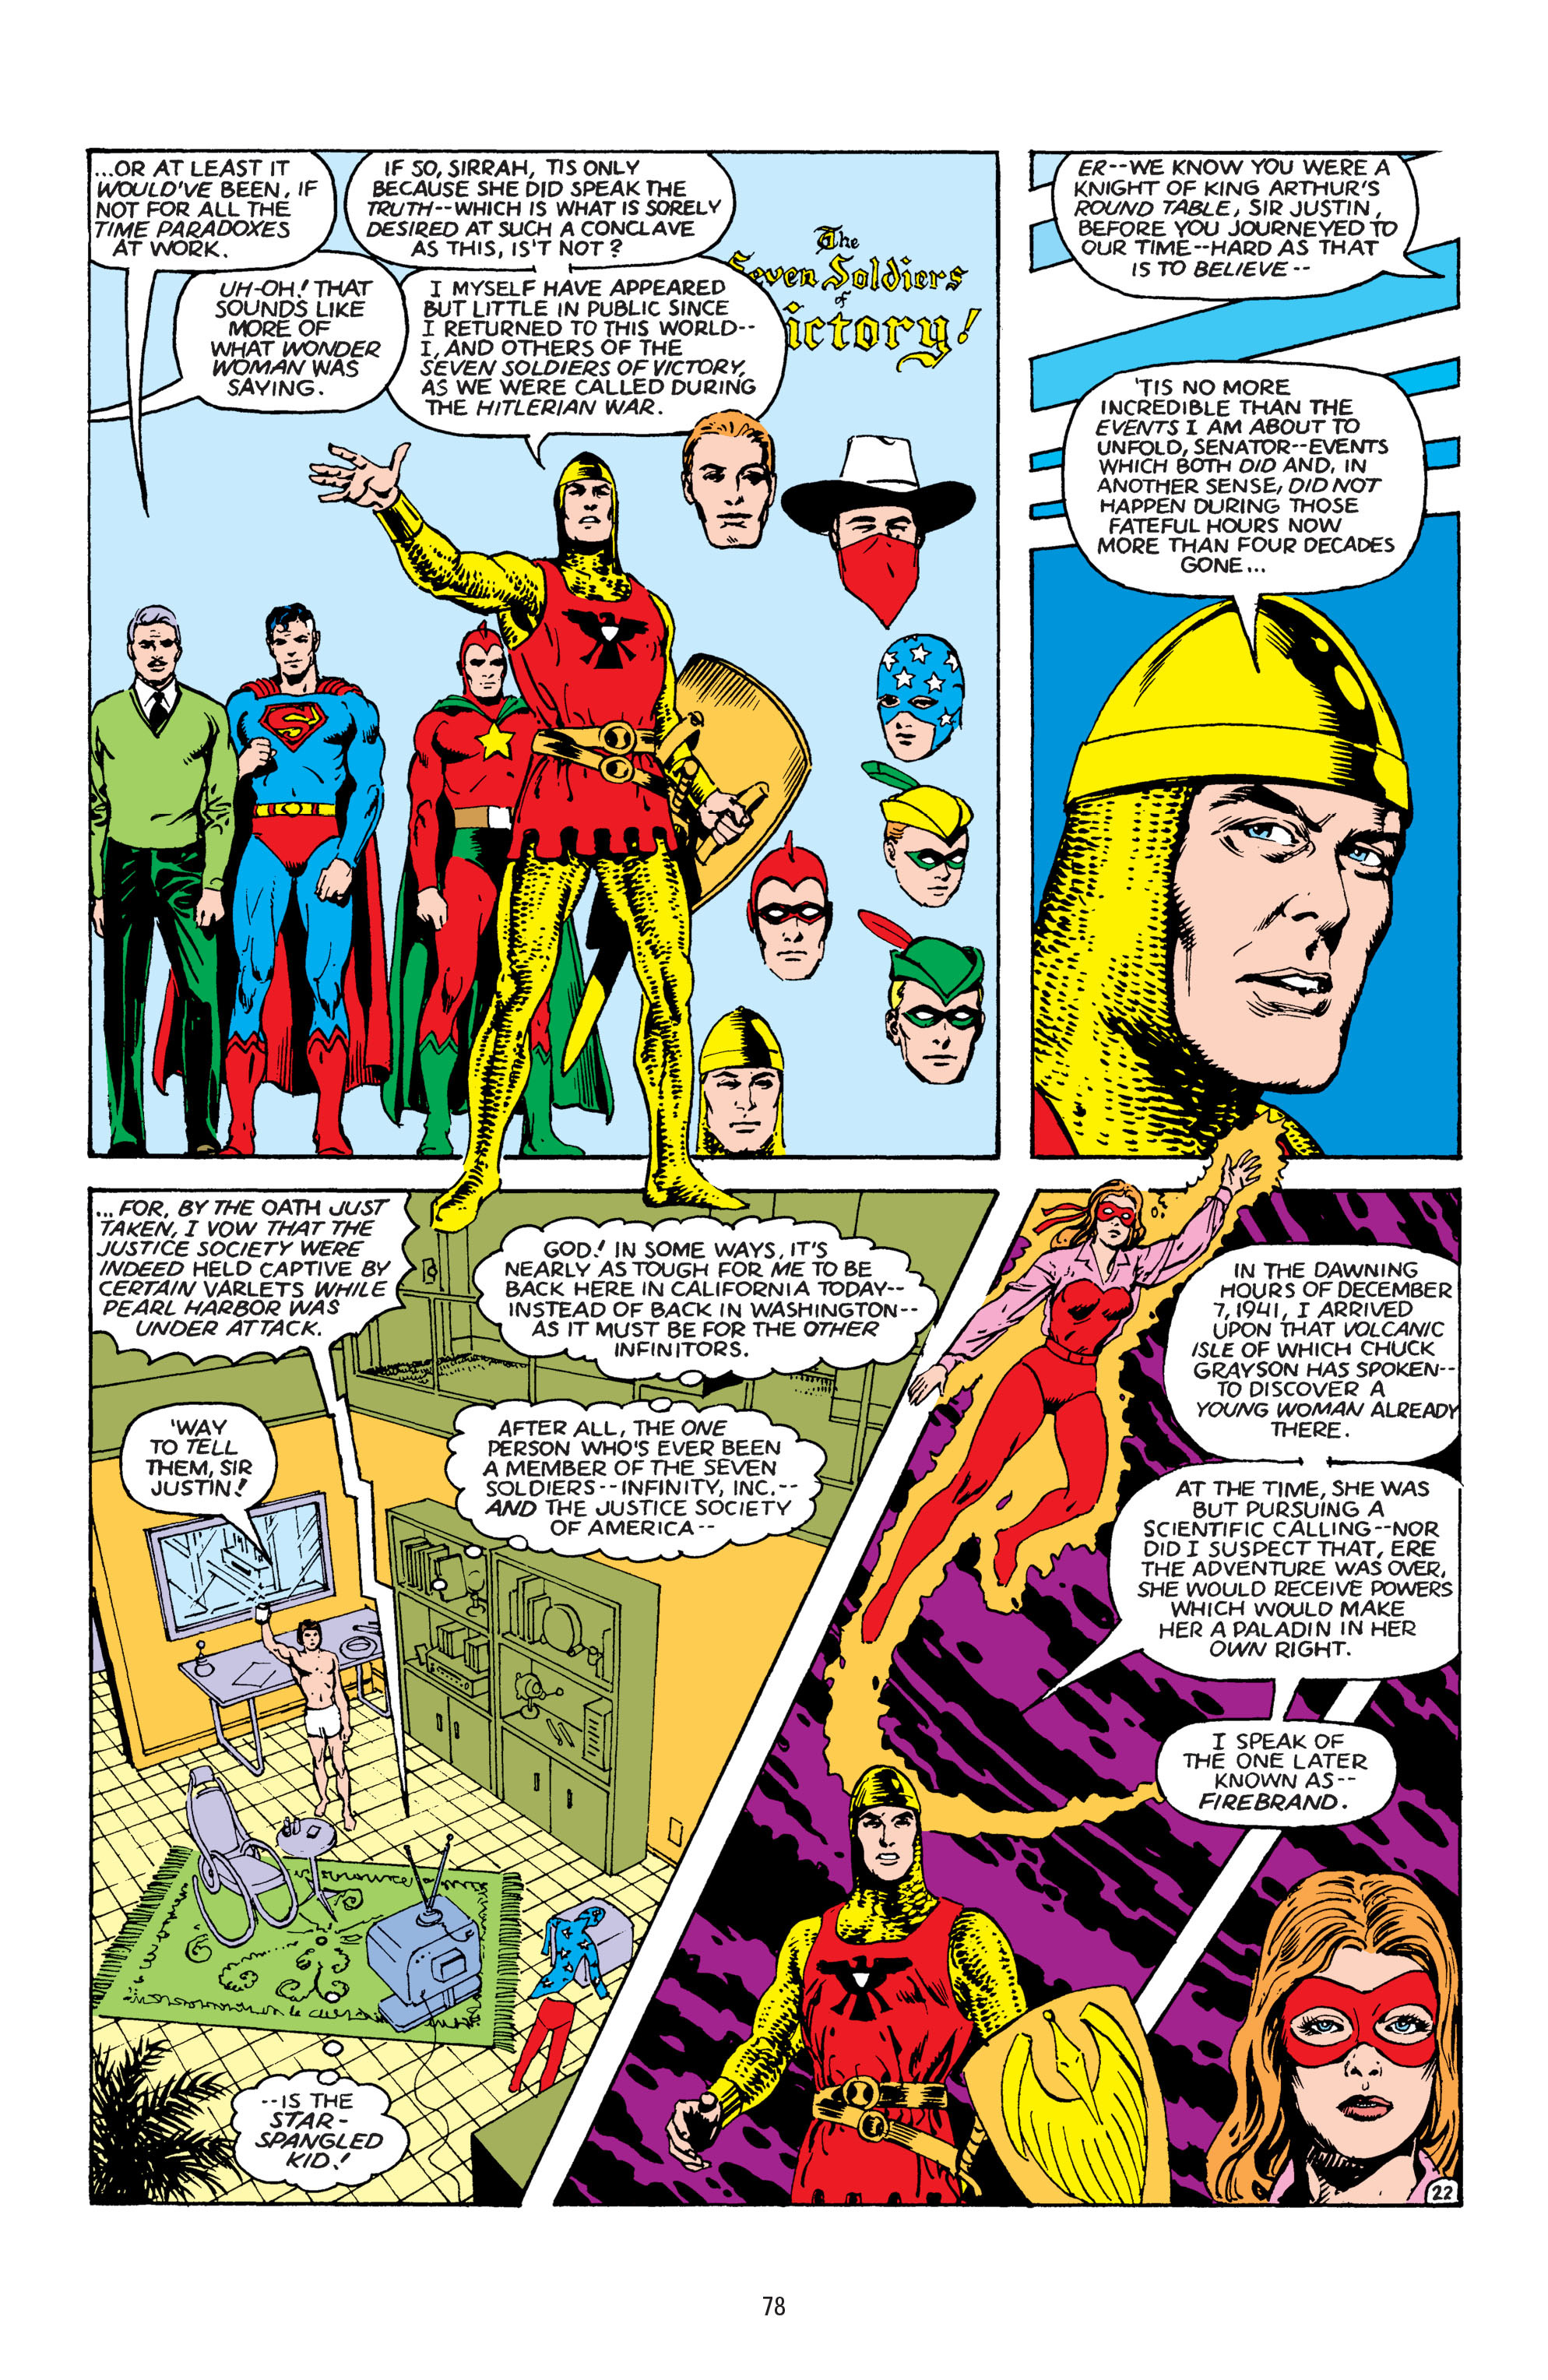 Read online America vs. the Justice Society comic -  Issue # TPB - 76